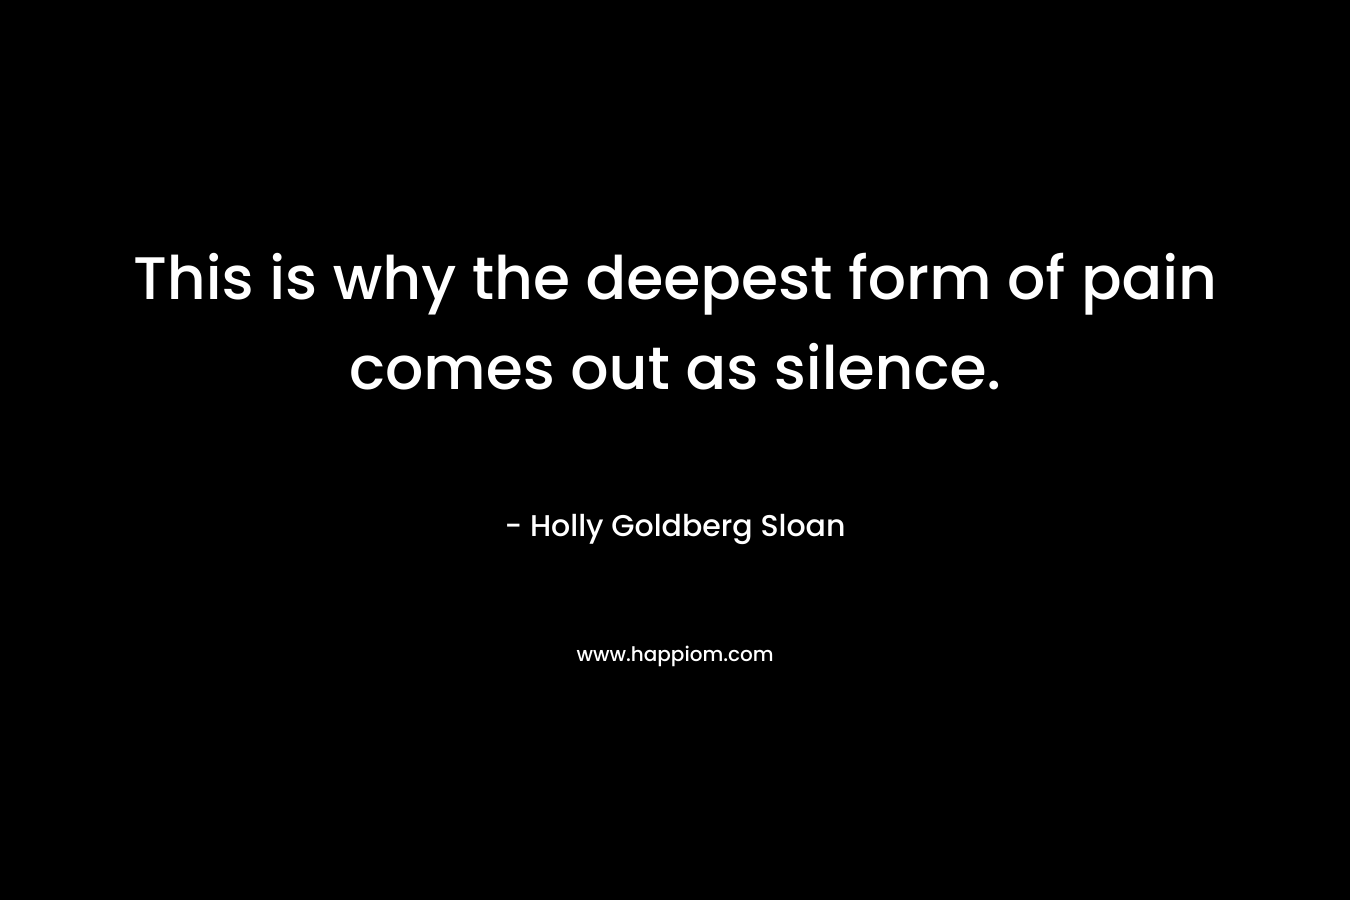 This is why the deepest form of pain comes out as silence.